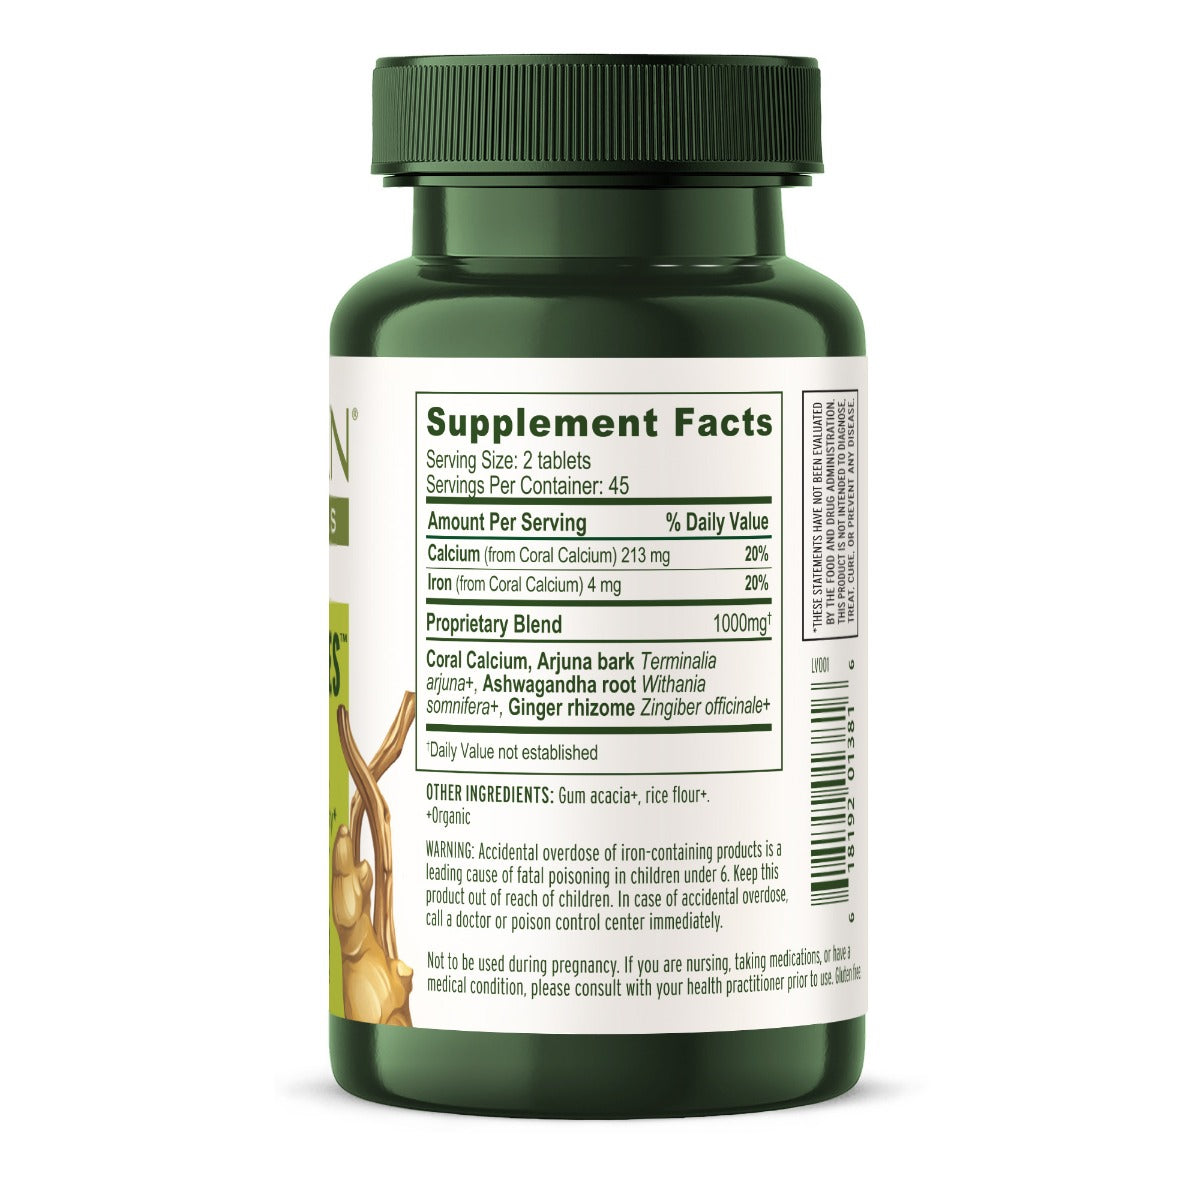 Supplements Facts Label Image